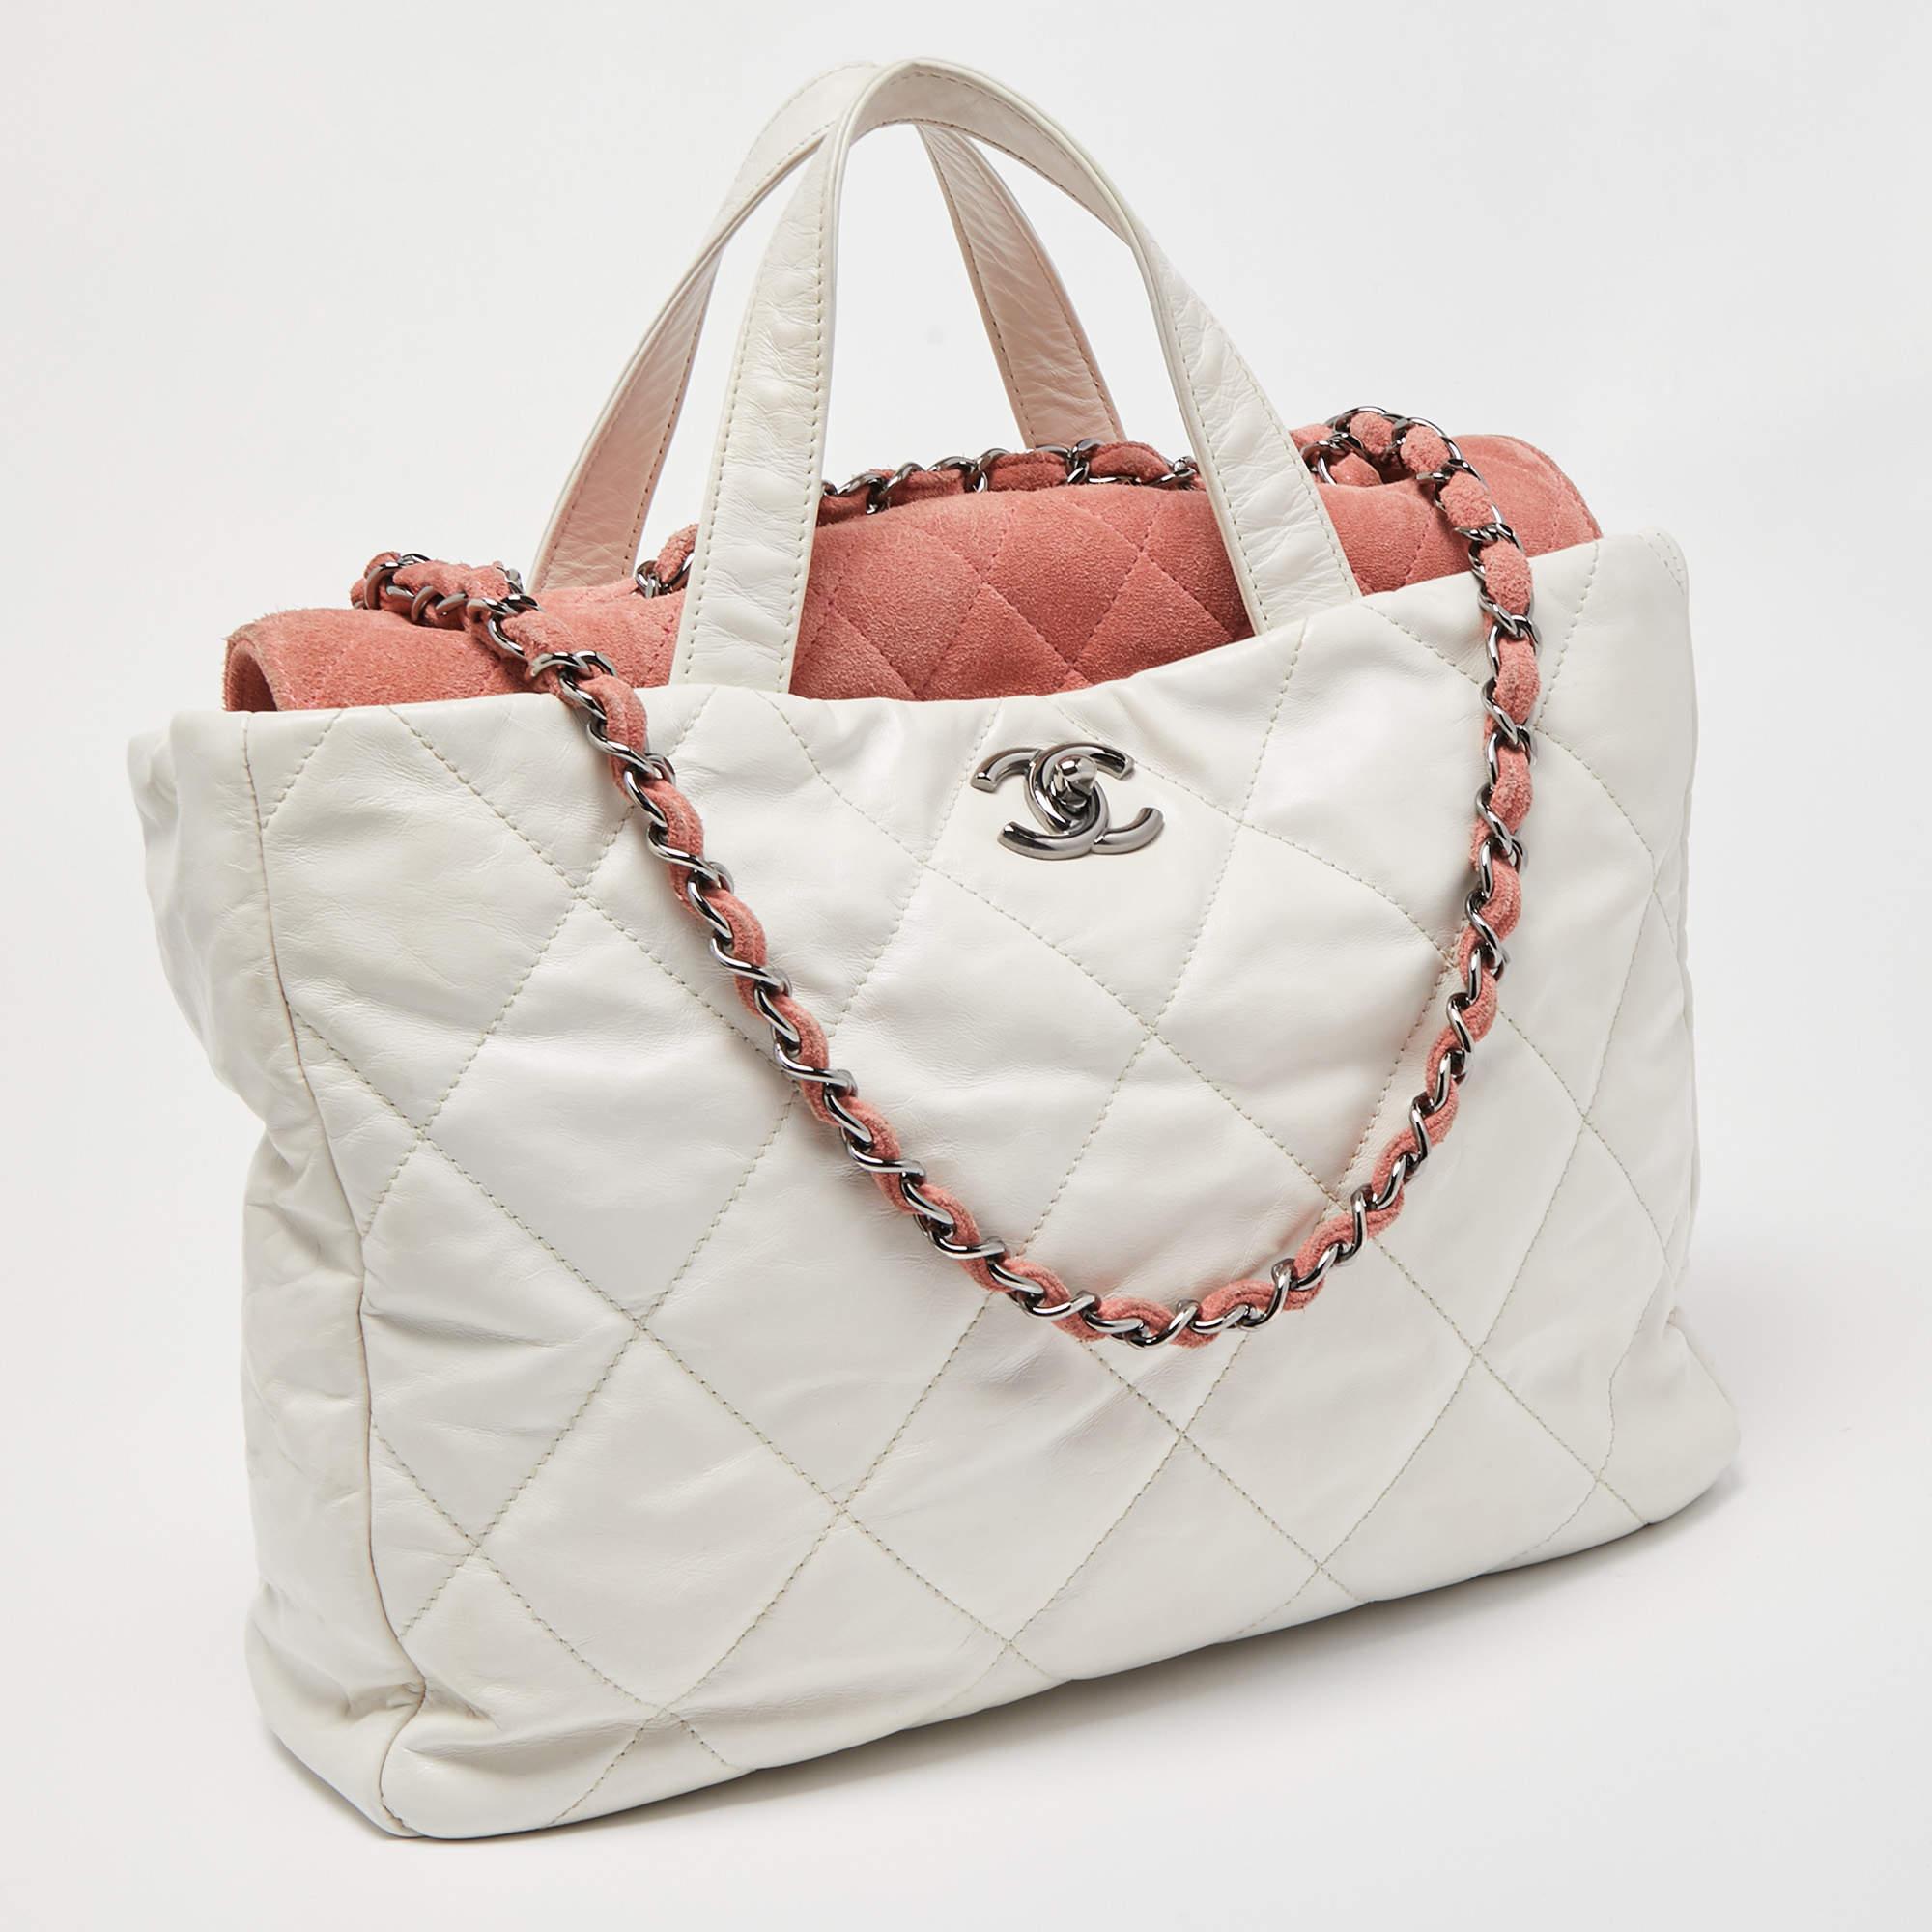 Beige Chanel White/Pink Quilted Leather And Suede Portobello Tote